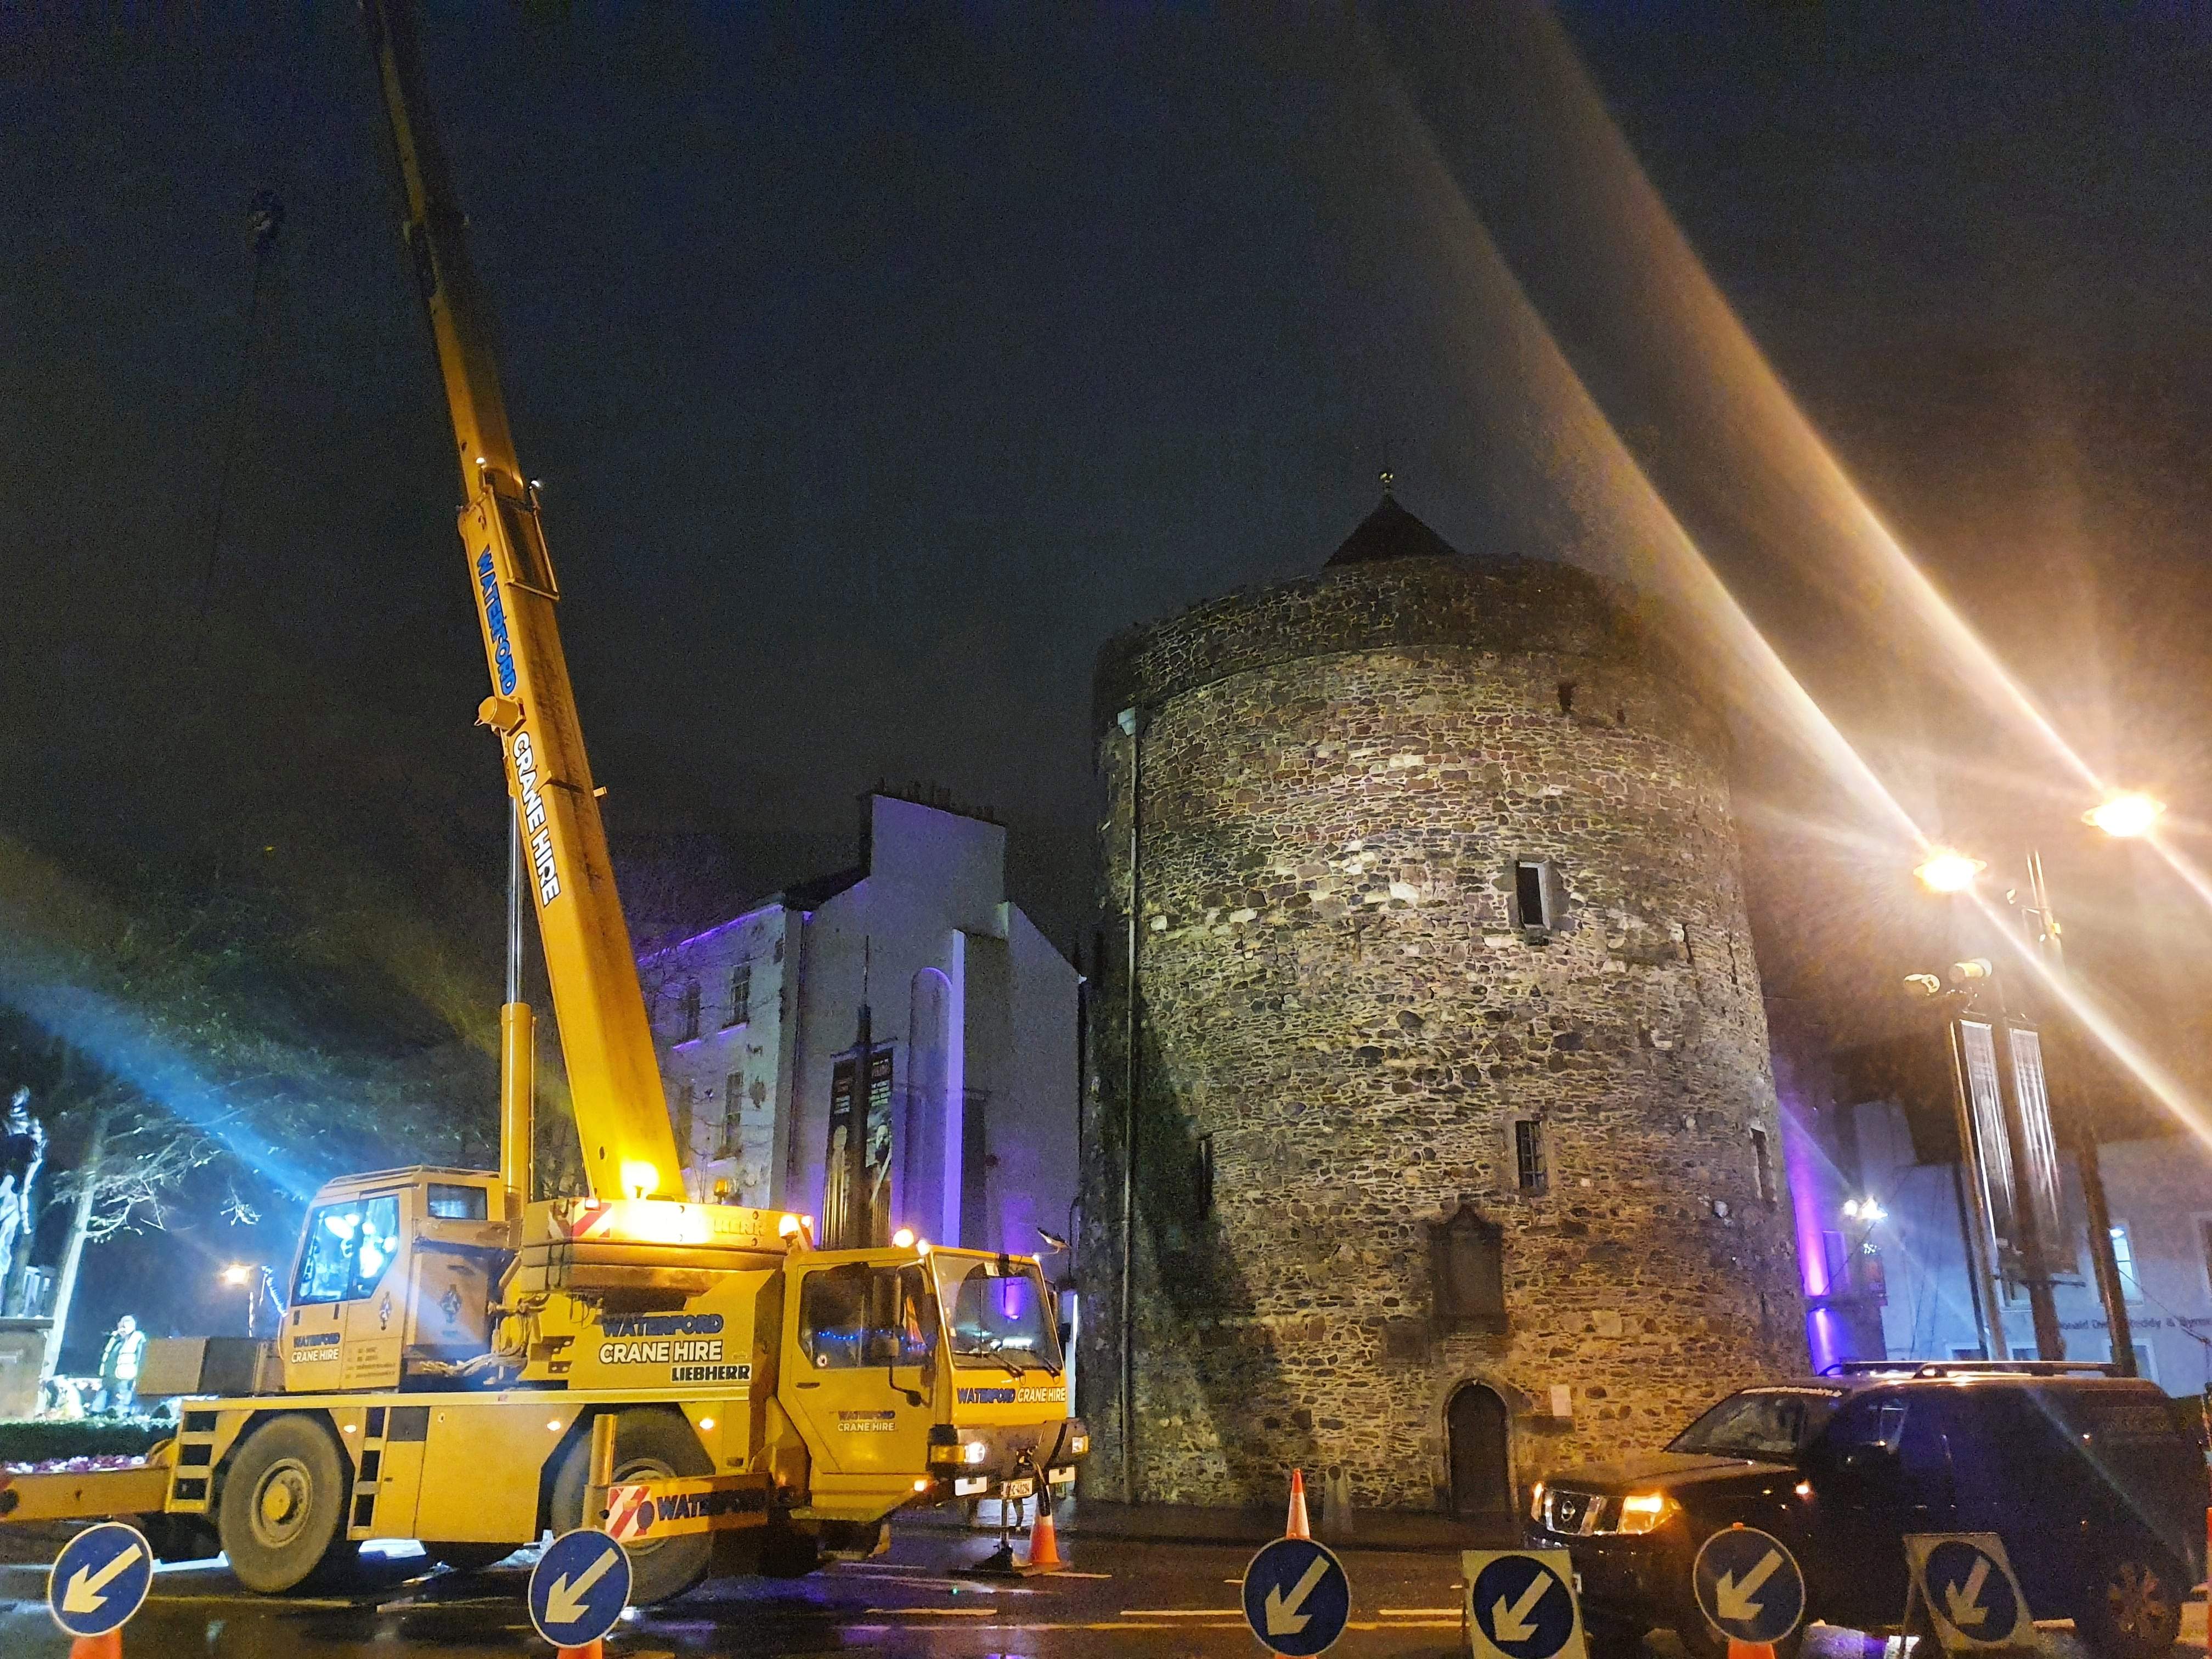 Working along side Reginald's Tower, Waterford City